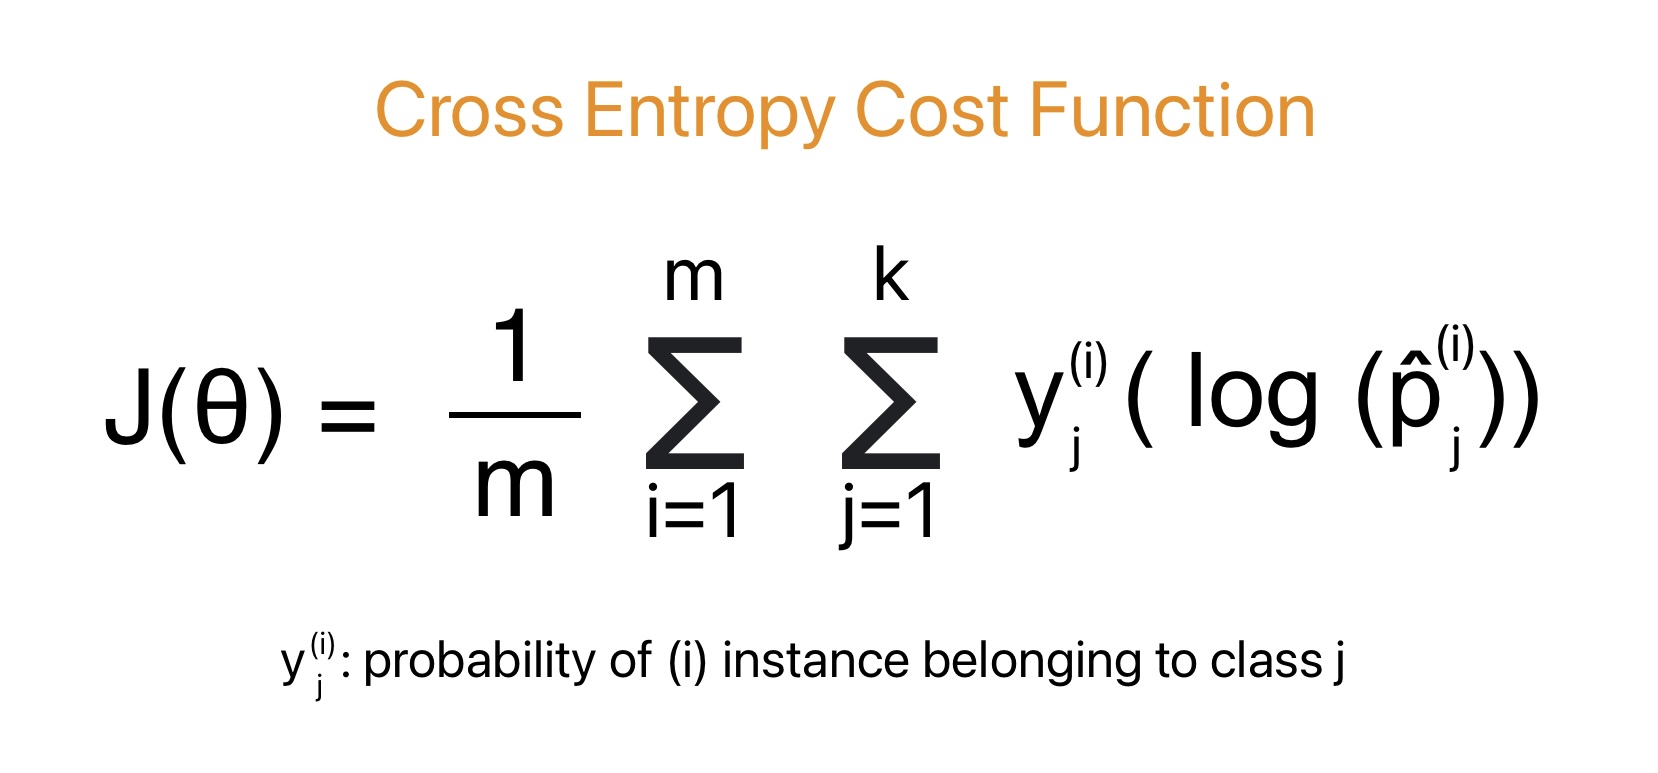 This image shows the equation for Cross Entropy Cost Function use as loss function for multi logistical regression.